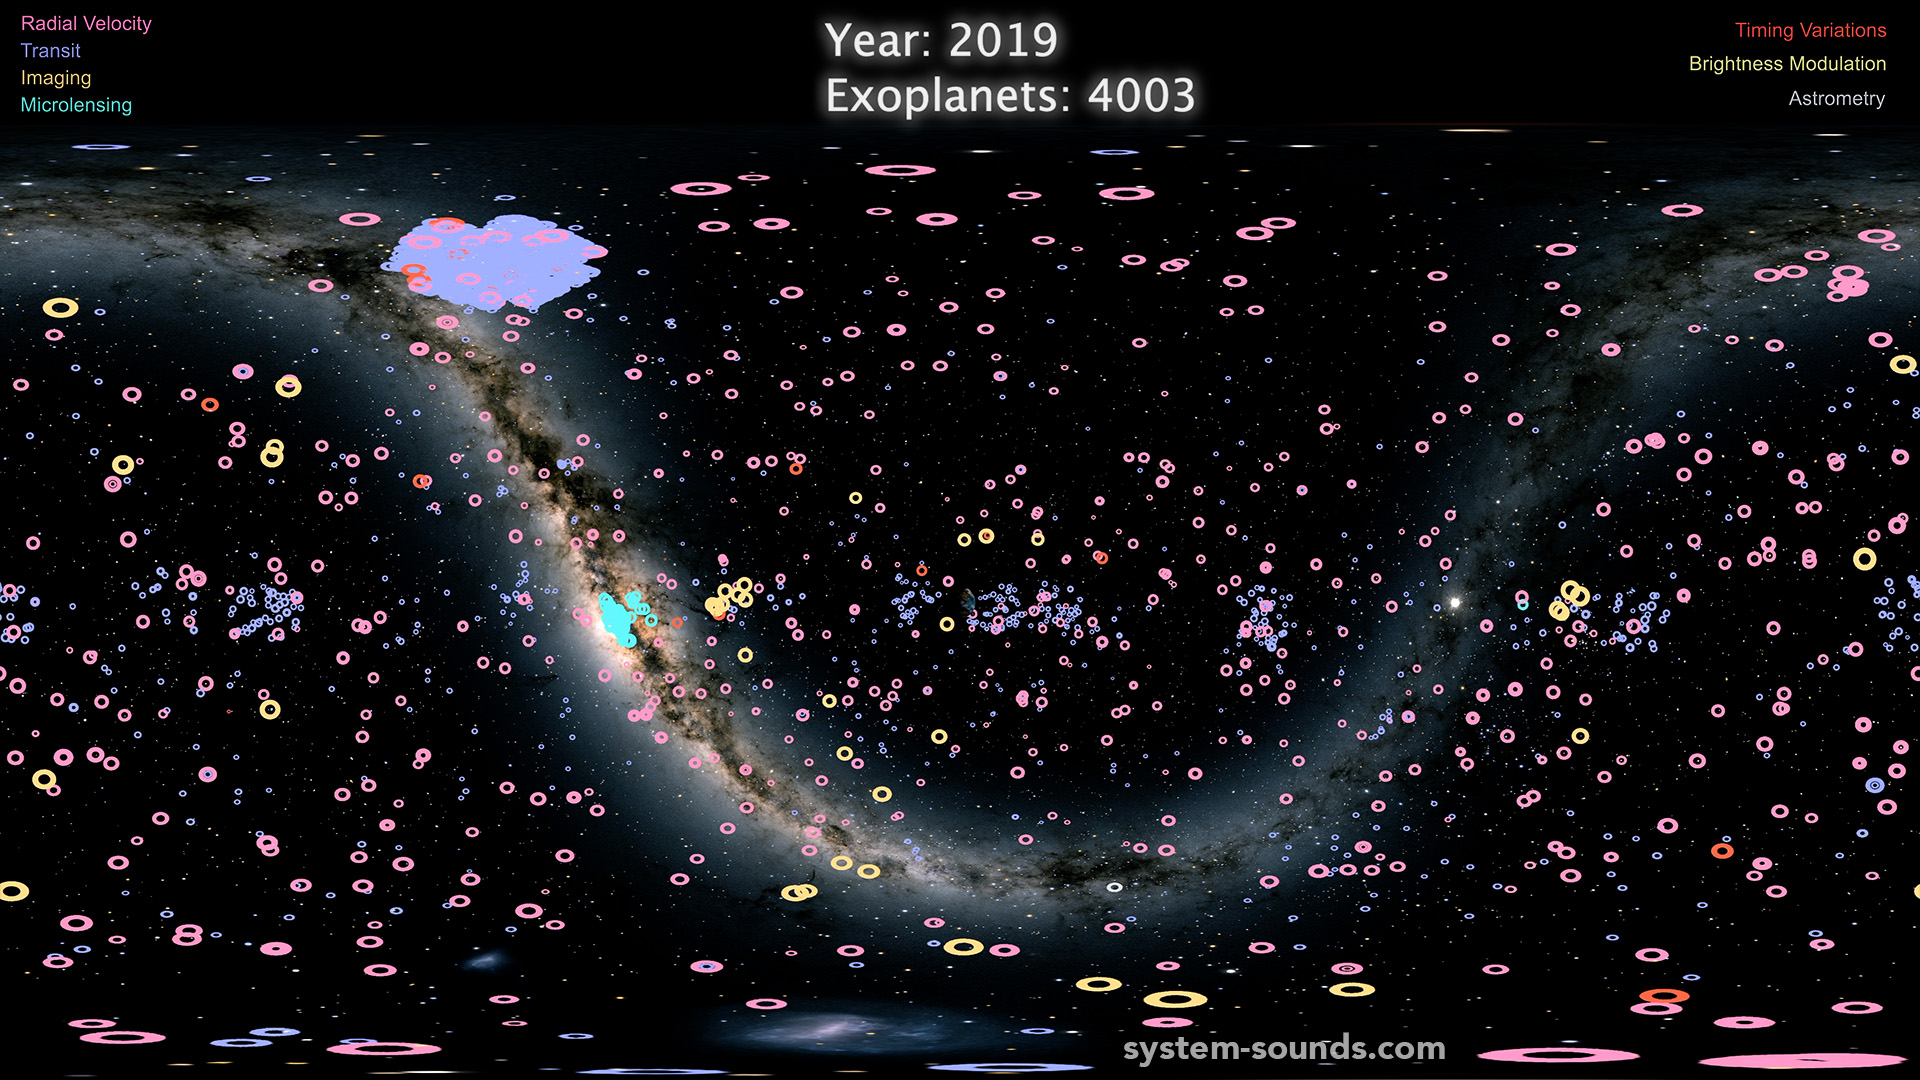 Full sky map of known exoplanets